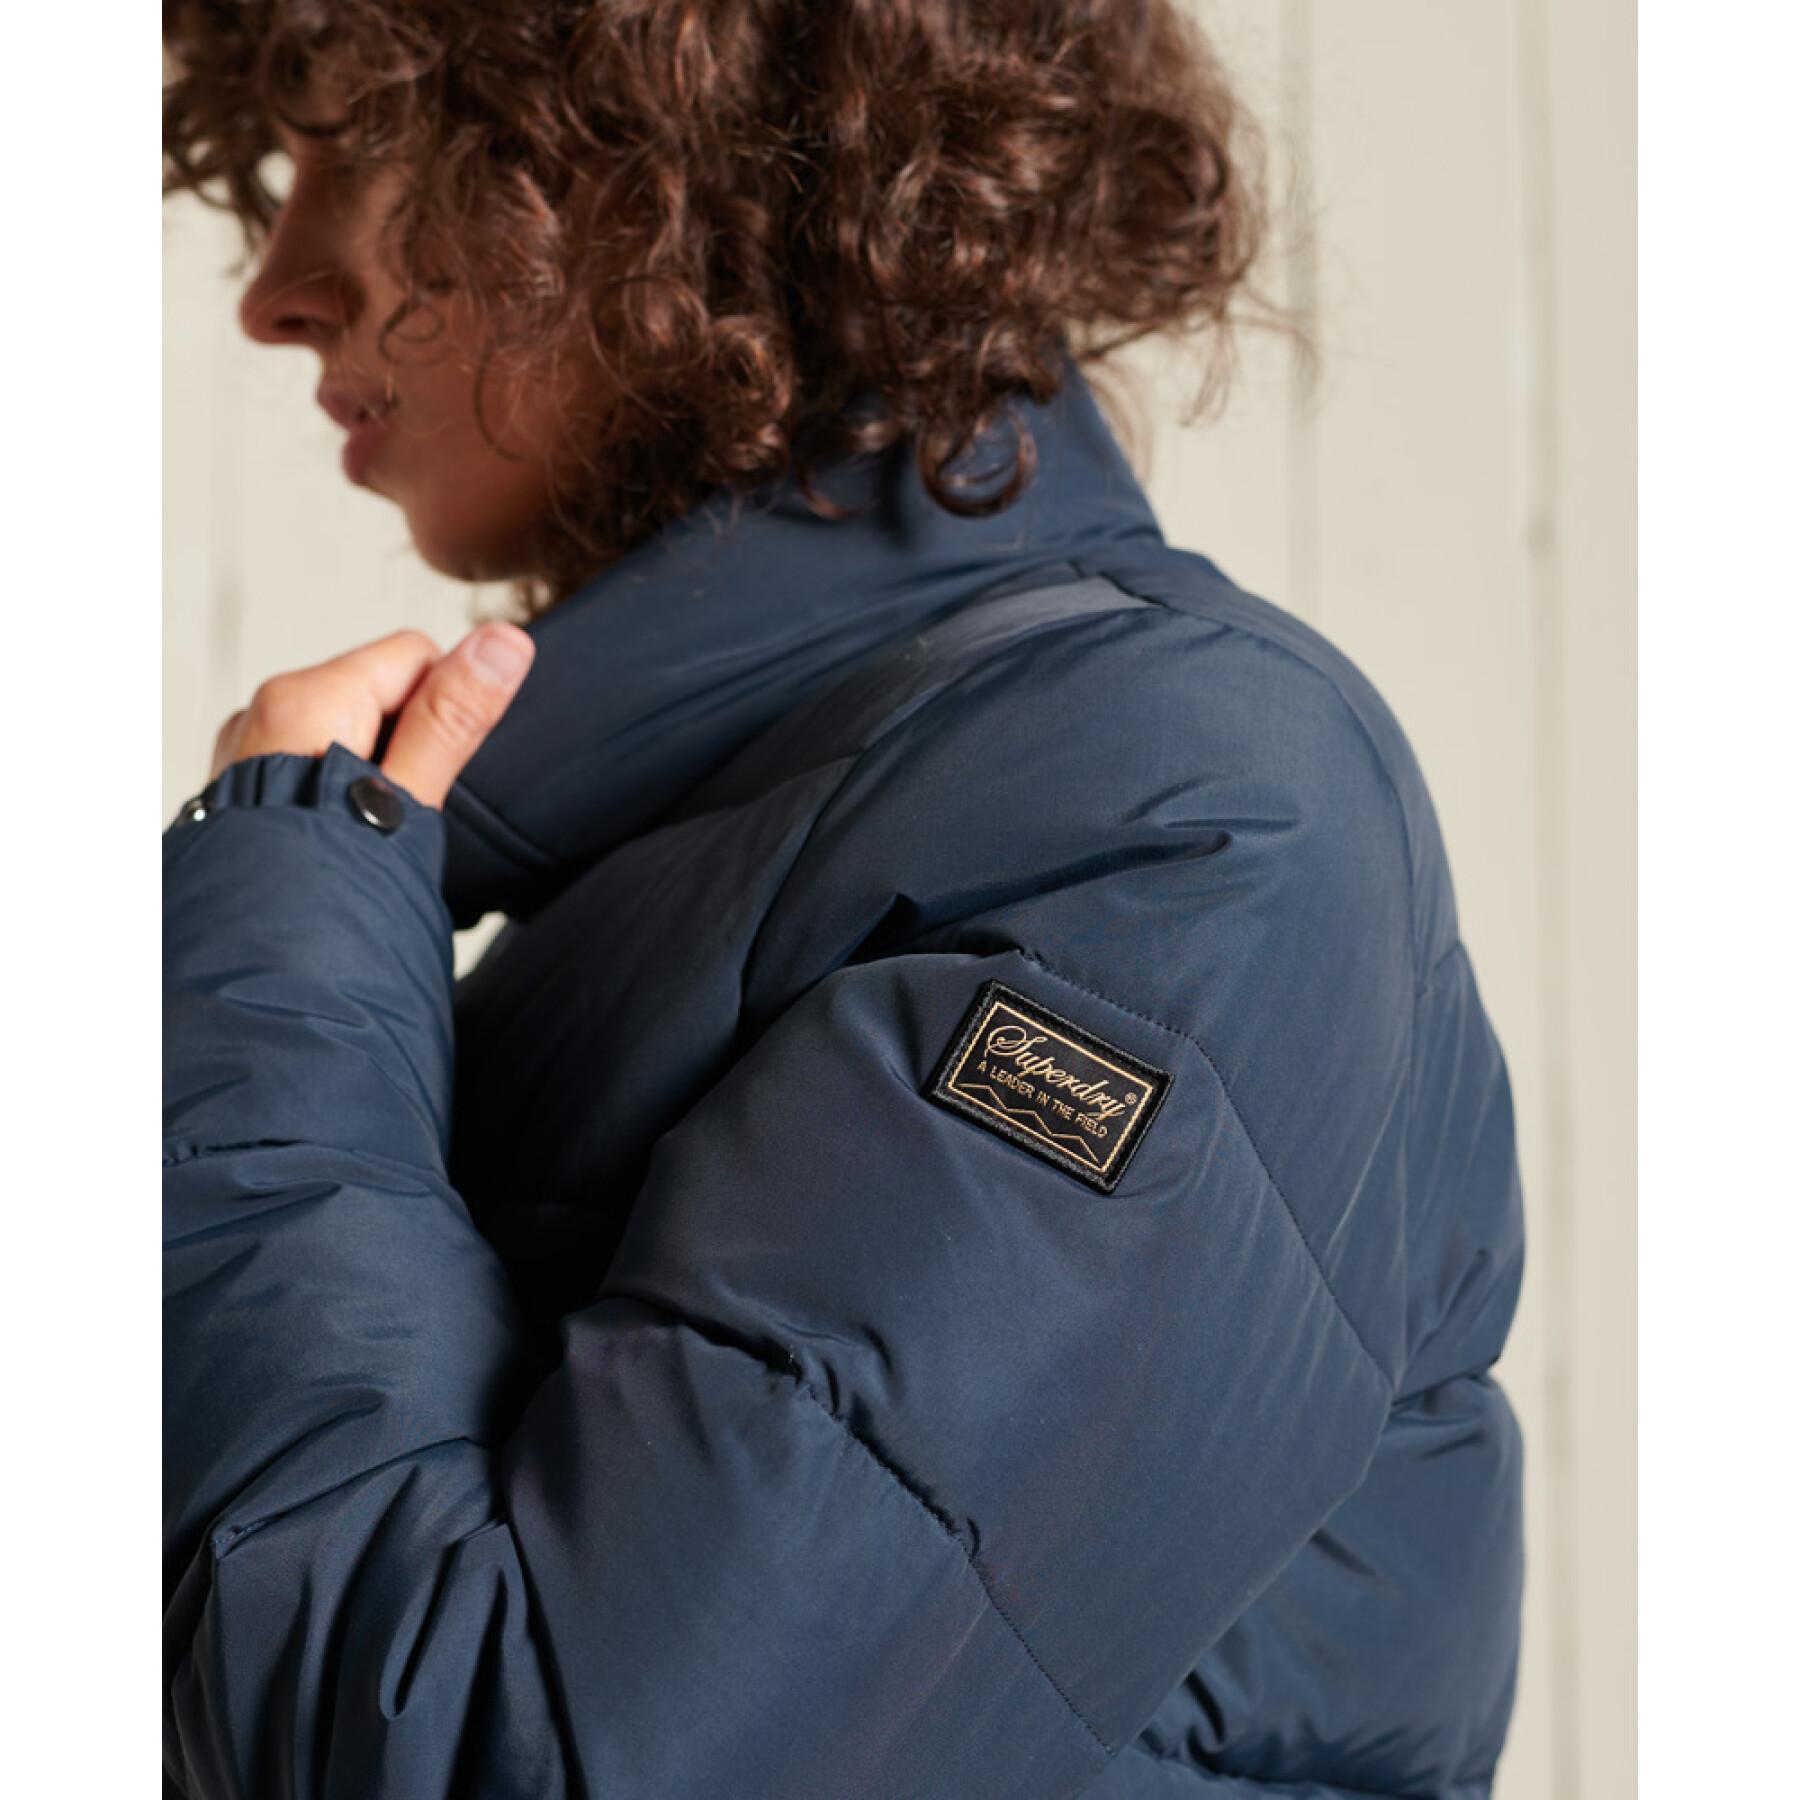 Puffer Jacket Superdry Source Retro